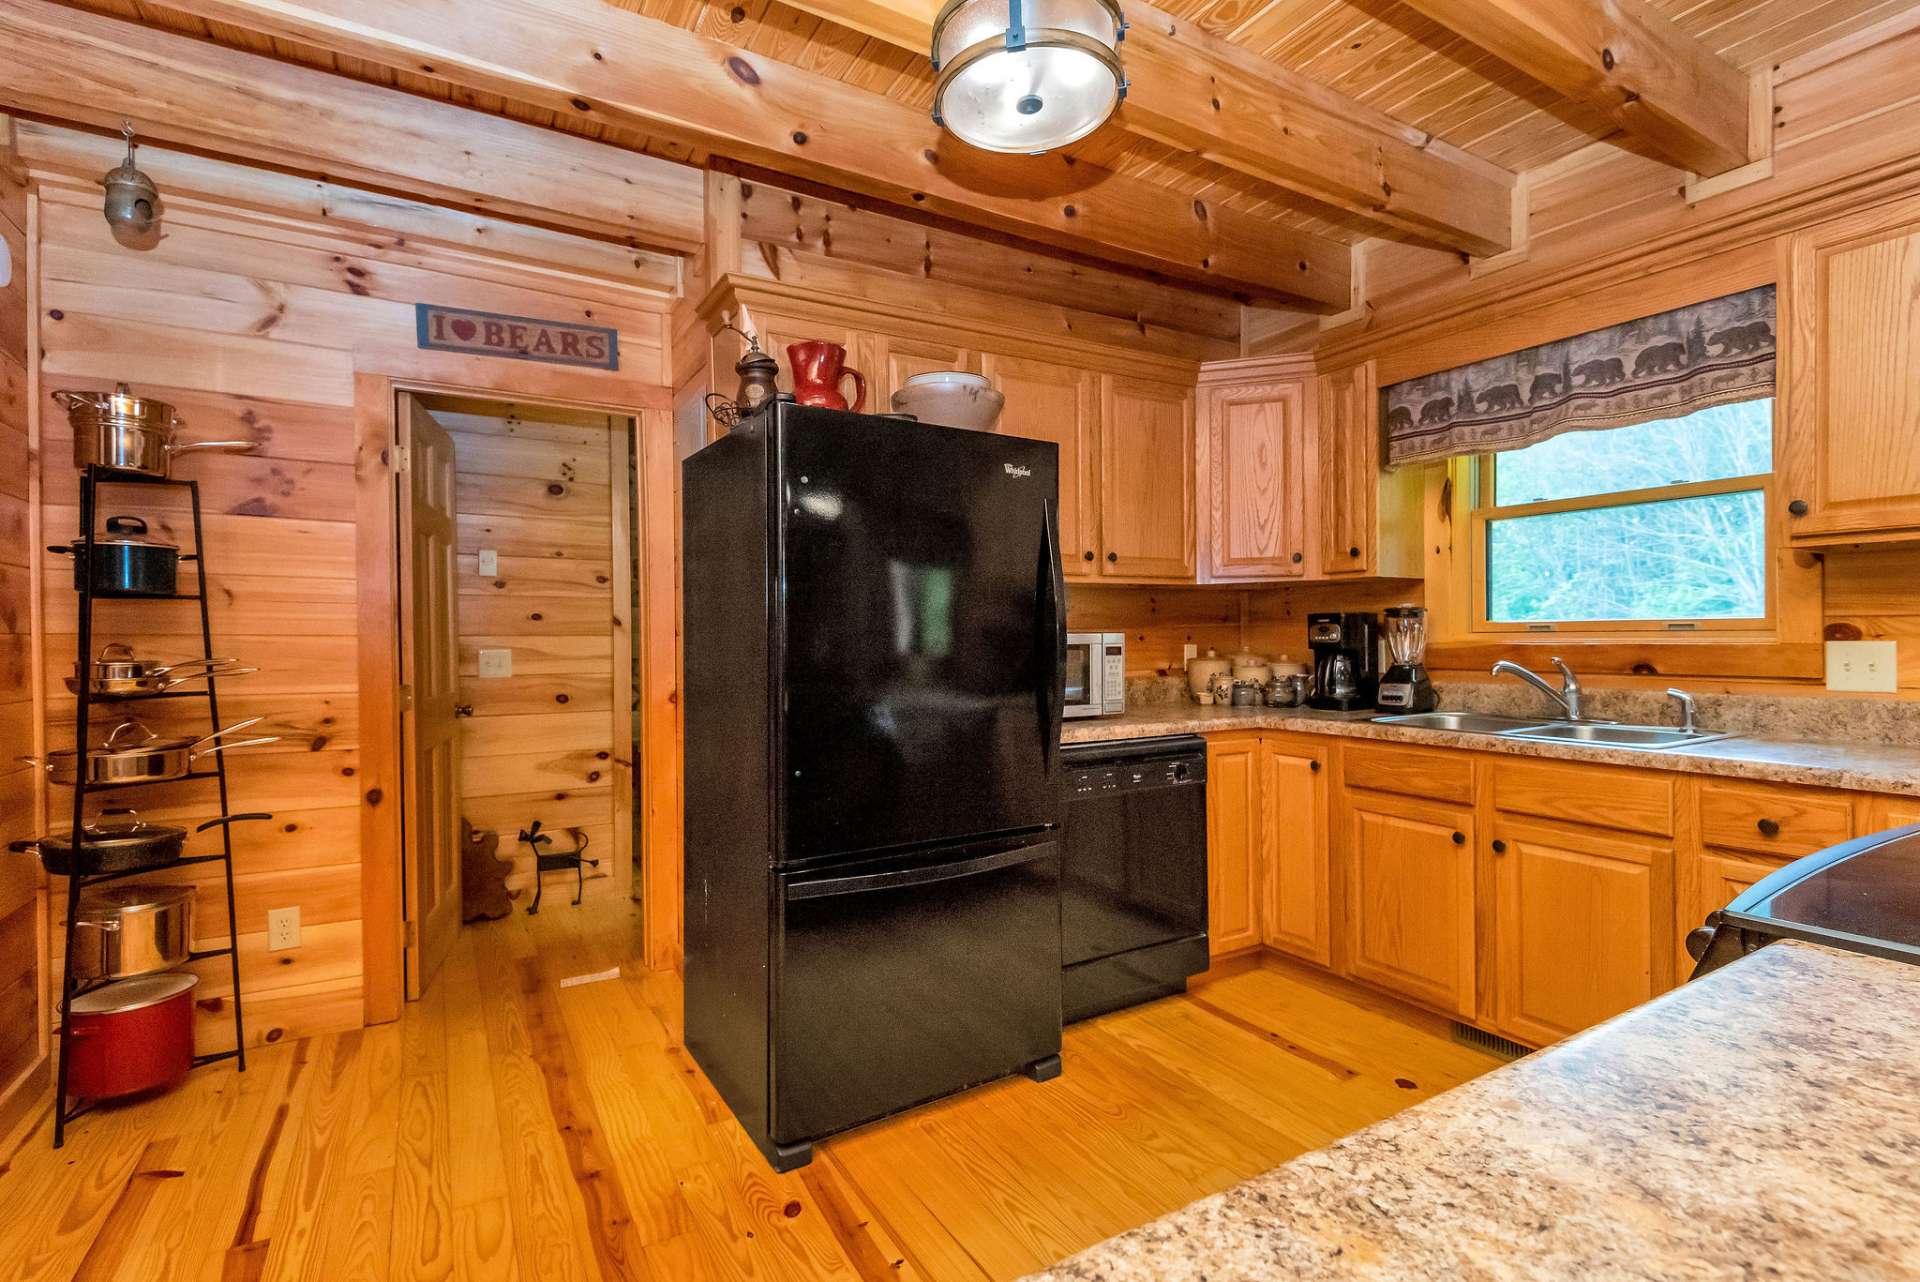 Sleek black appliances beautifully complement the warm pine wood.